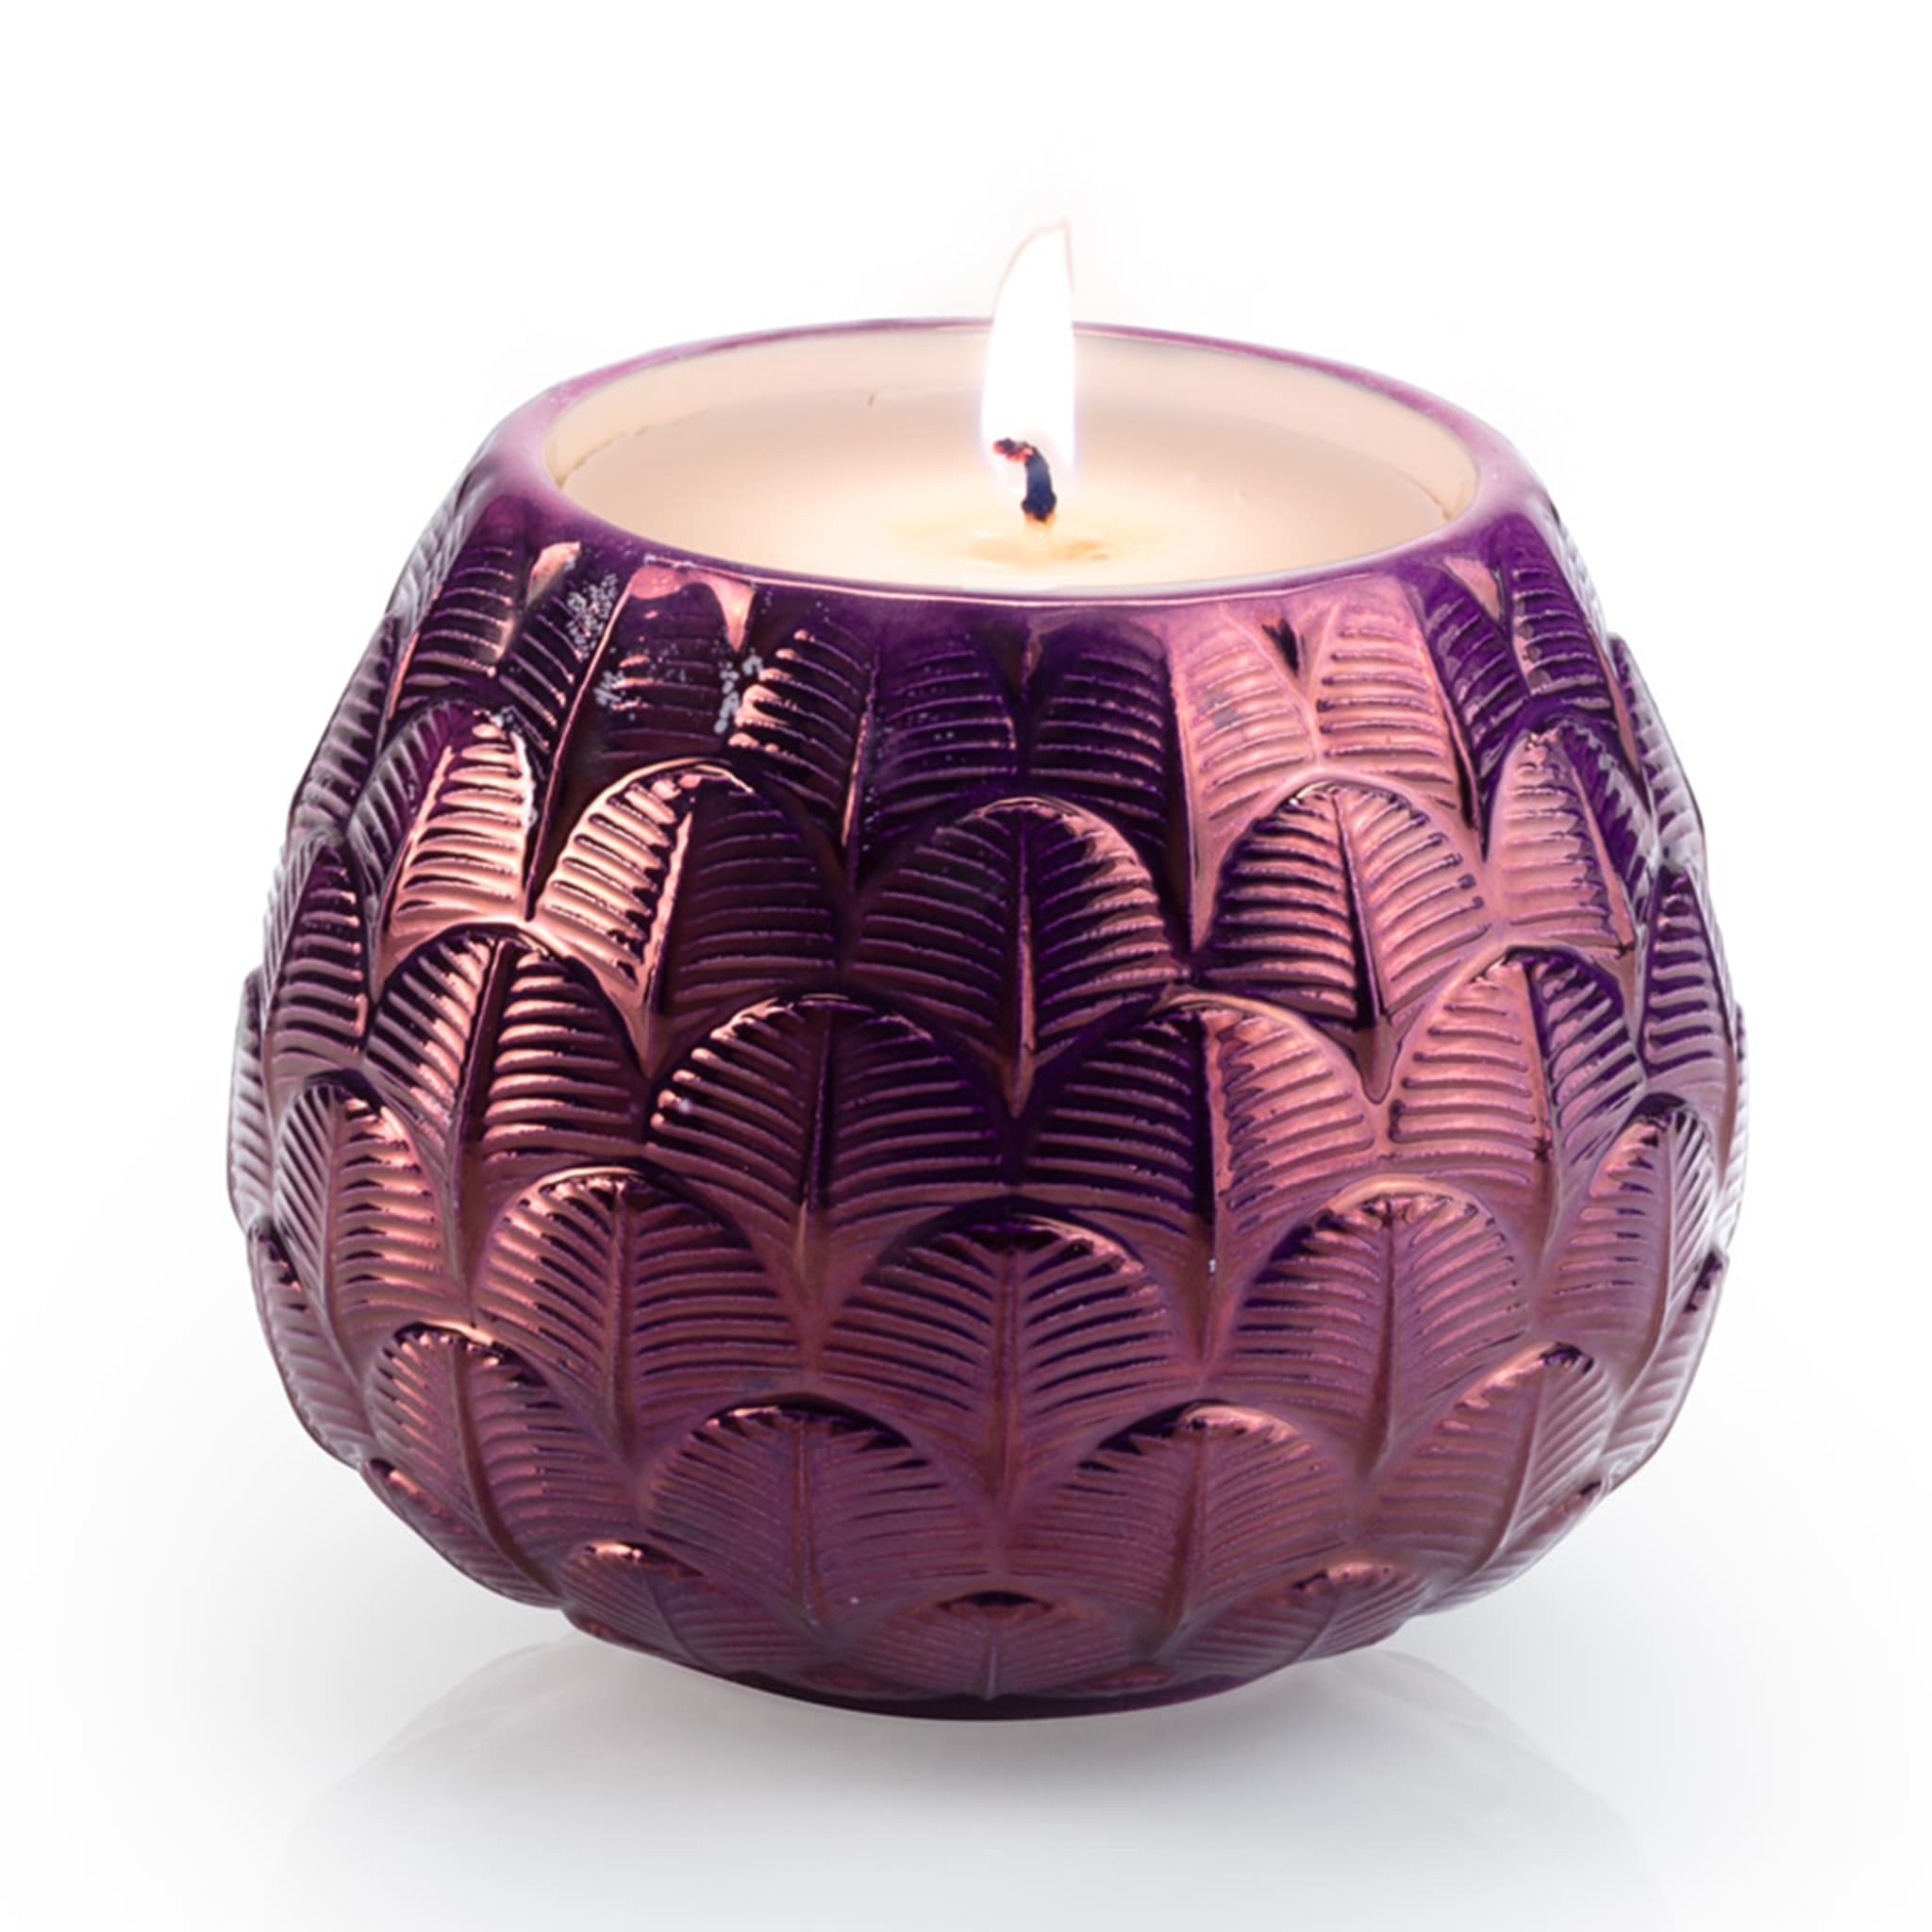 CHARLOTTE PEACOCK CANDLE COVER - PURPLE - Alternative view 1